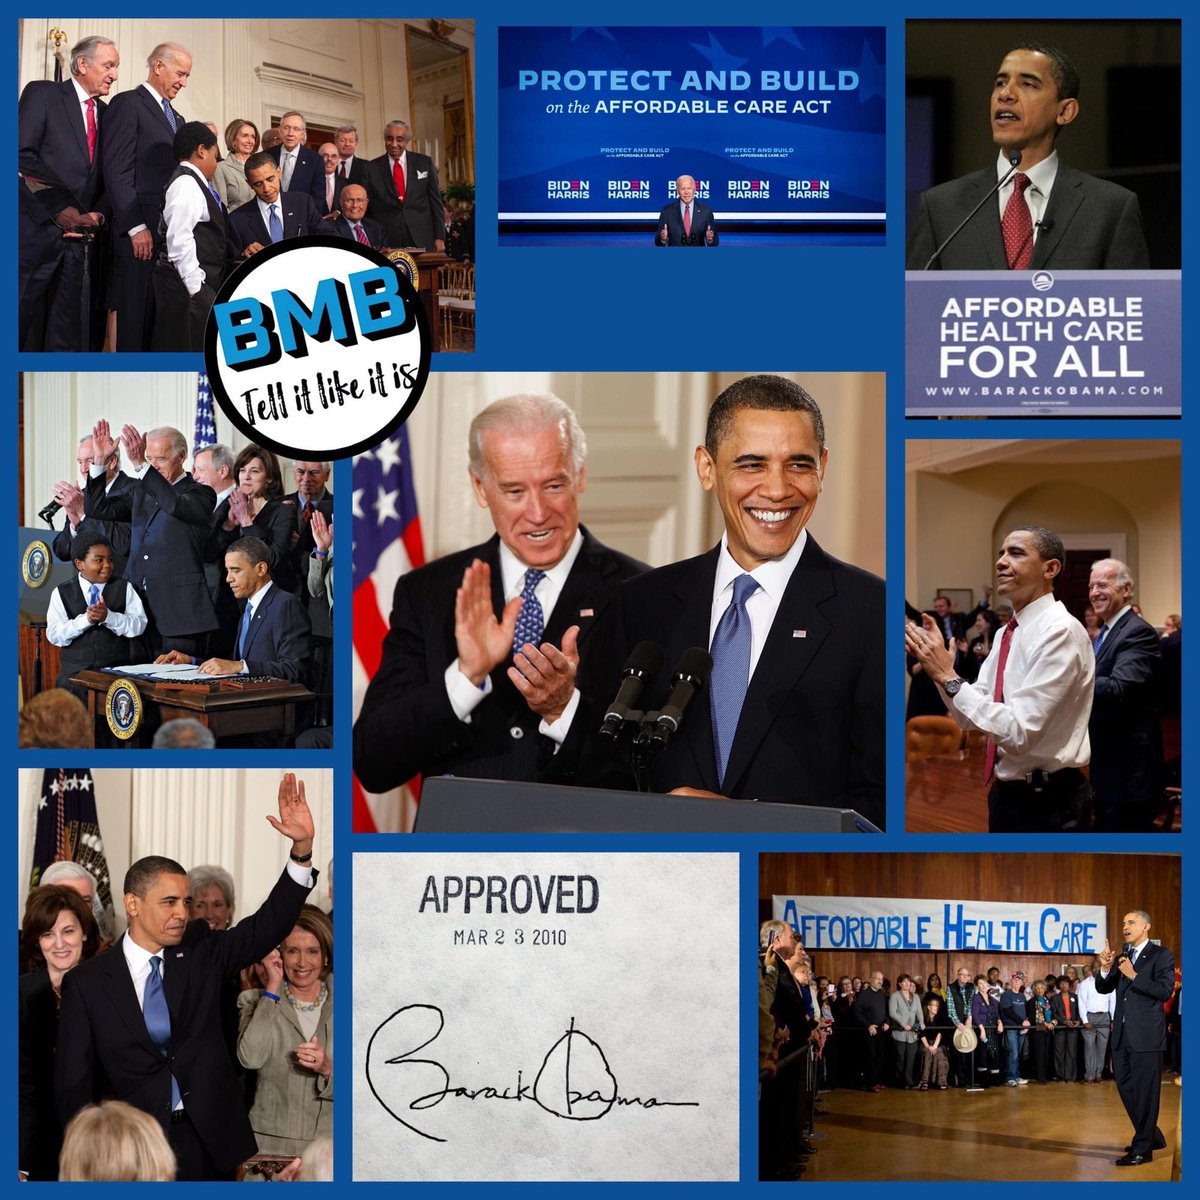 14 years ago The Affordable Care Act was signed into law by President Barack Obama on March 23, 2010. Thank Mr. President Obama for fighting for the American People!
#AffordableCareAct #BarackObama #JoeBiden #DemocratsDeliver #Obamacare